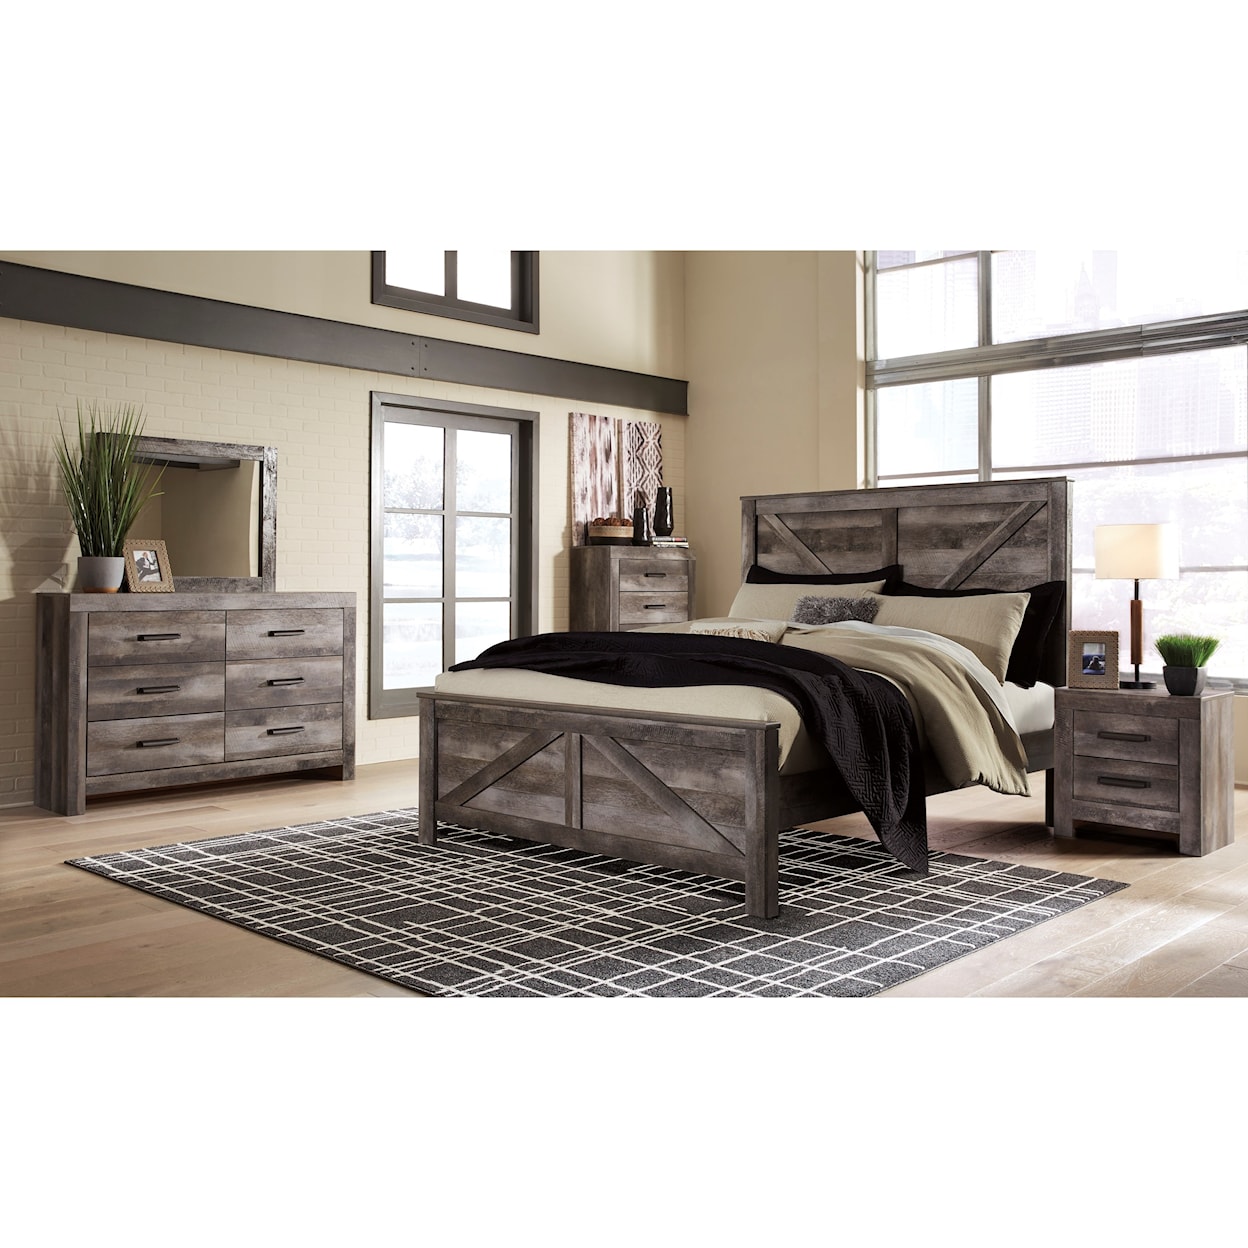 Ashley Furniture Signature Design Wynnlow Queen Bedroom Group